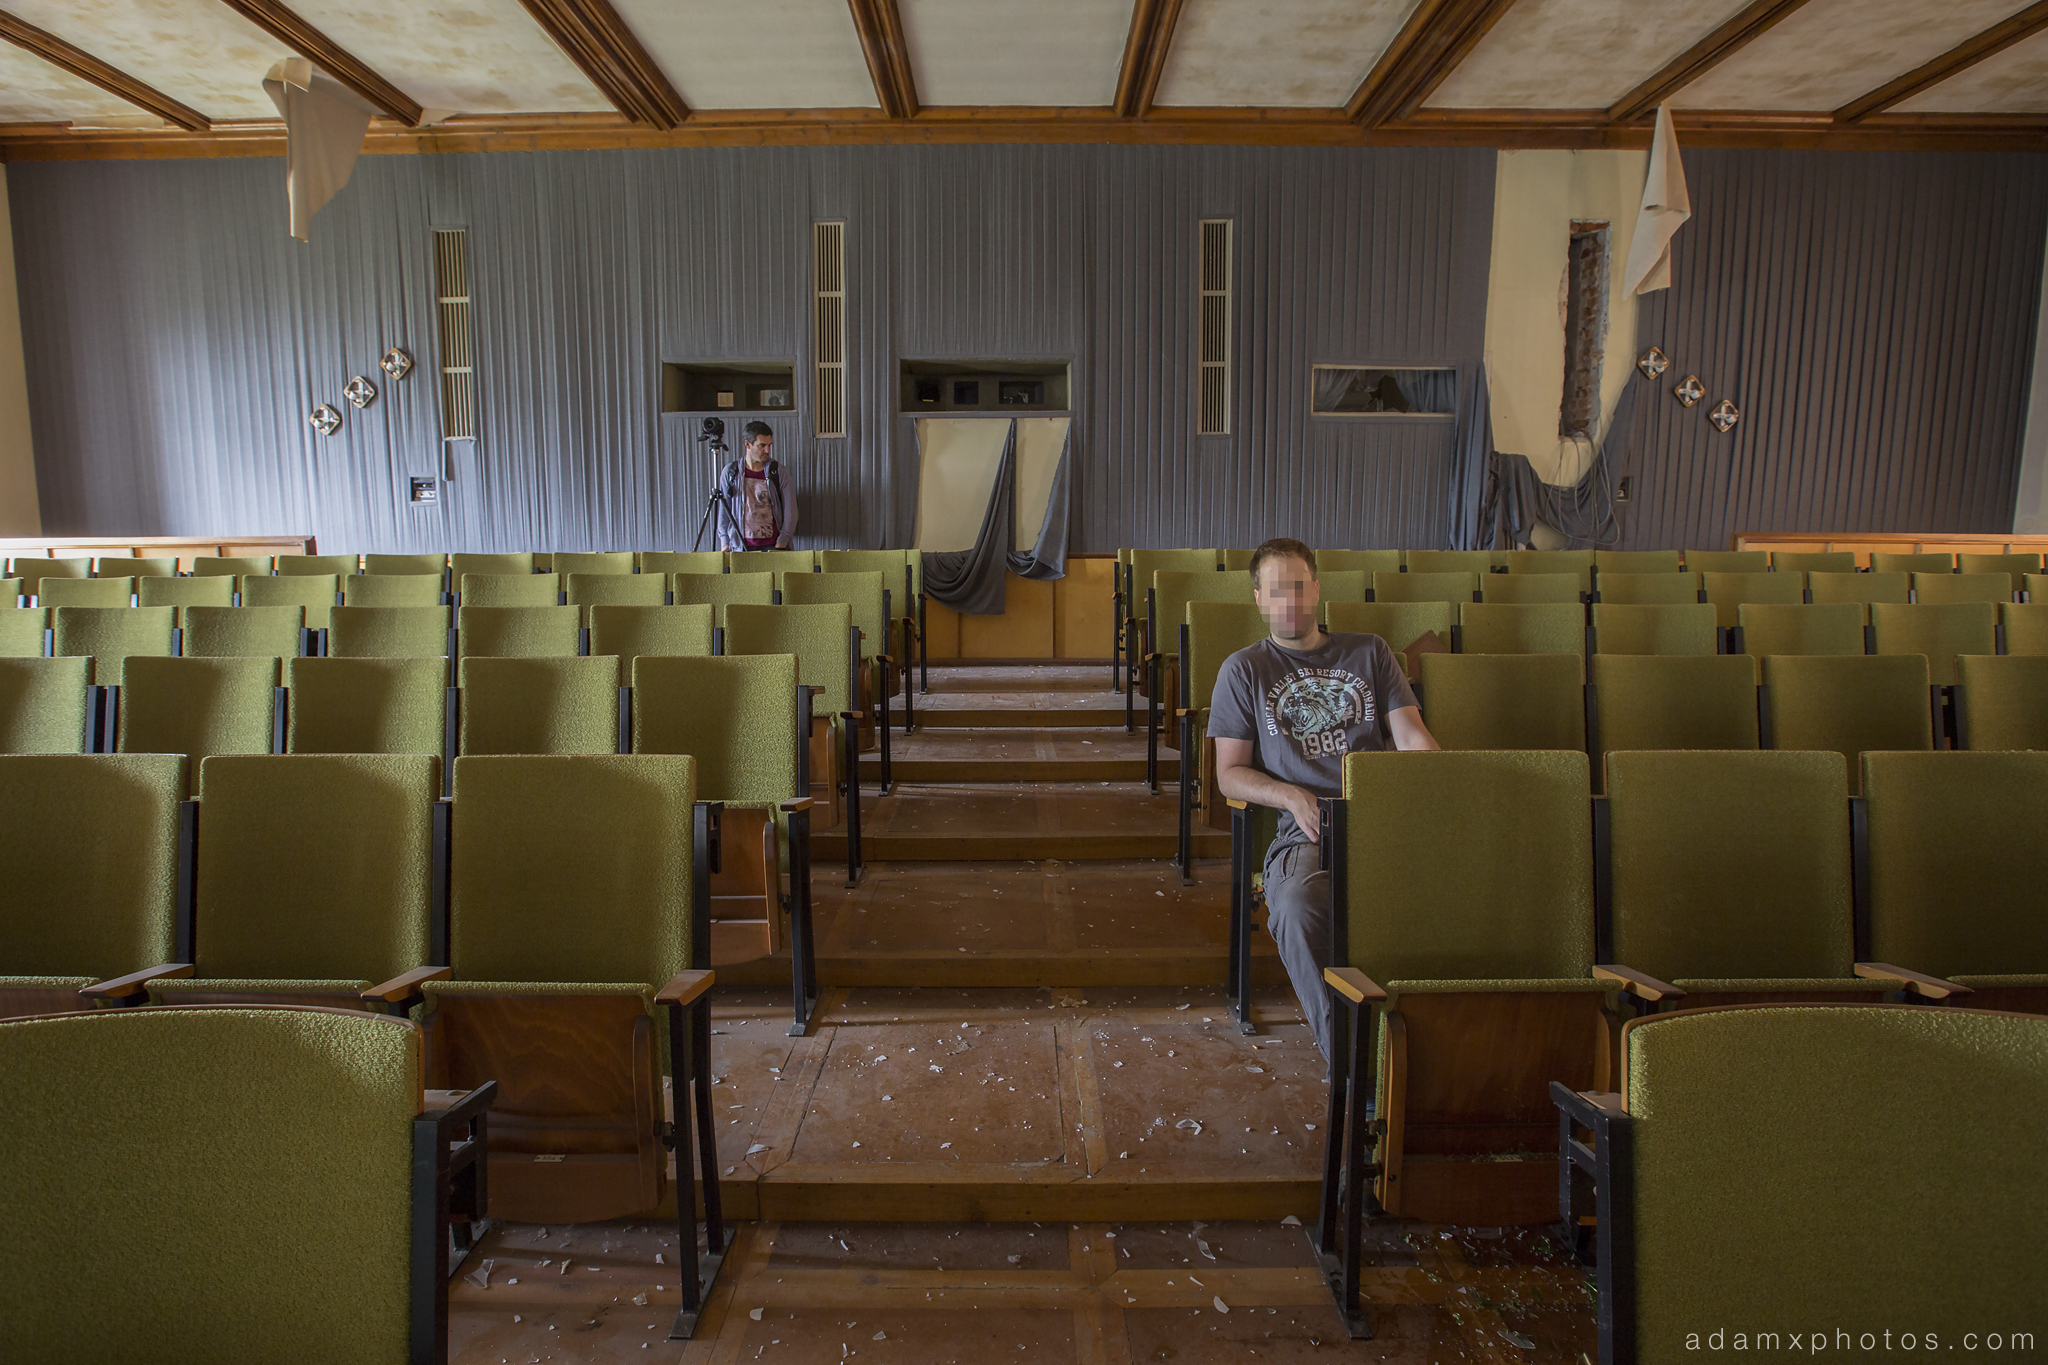 Adam X Urbex Nazi School Partishule N DDR Horsaal Germany Urban Exploration Decay Lost Abandoned auditorium ceiling seats chairs stage selfie James Kerwin